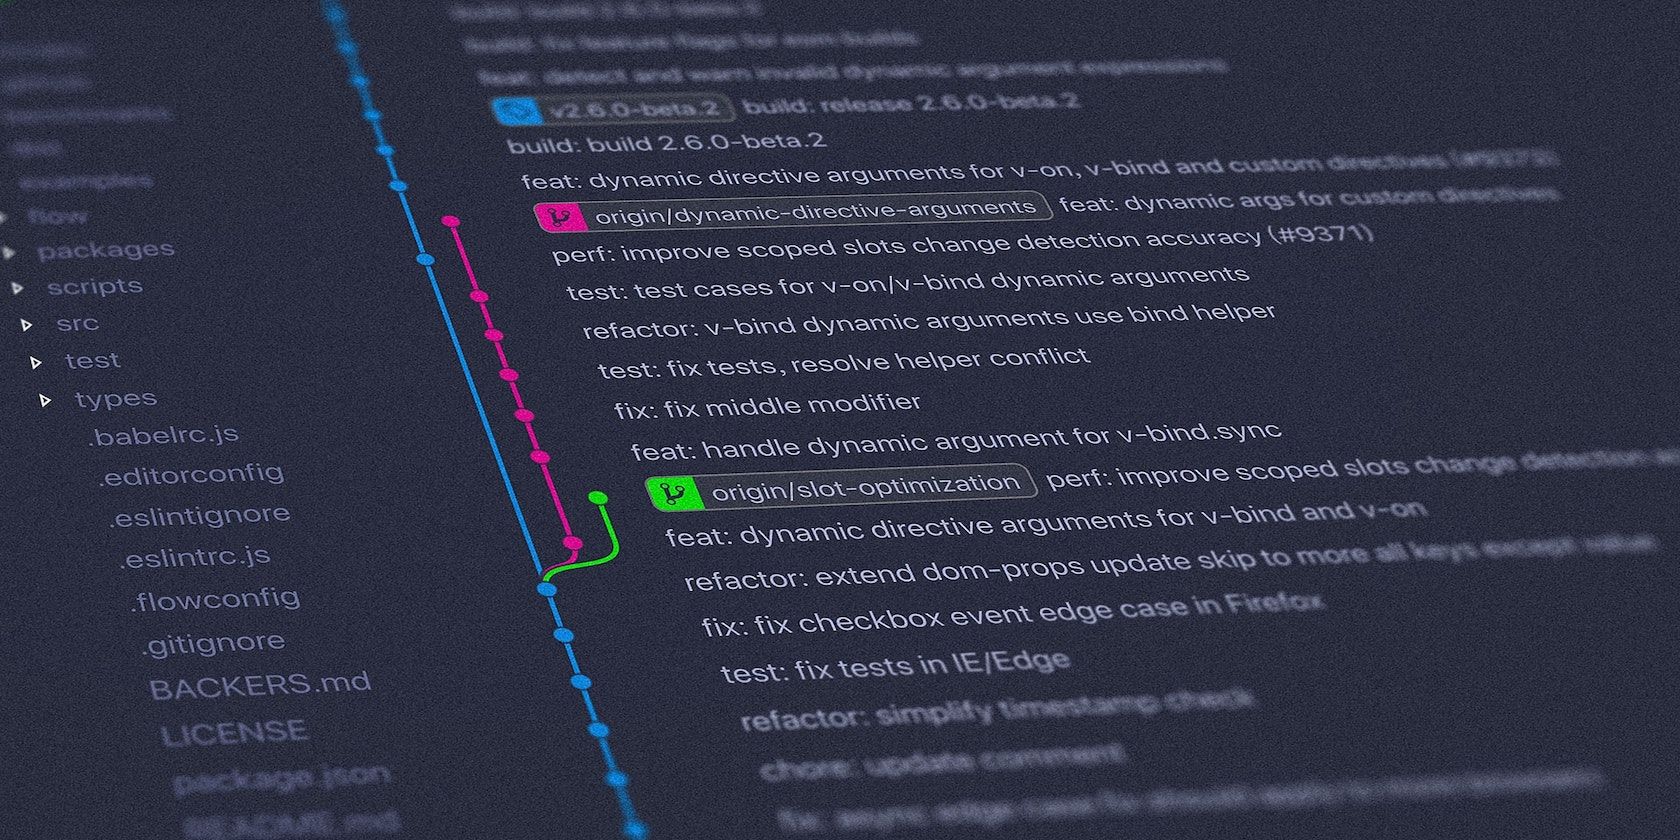 A user interface showing line-by-line git history alongside color-coded branches